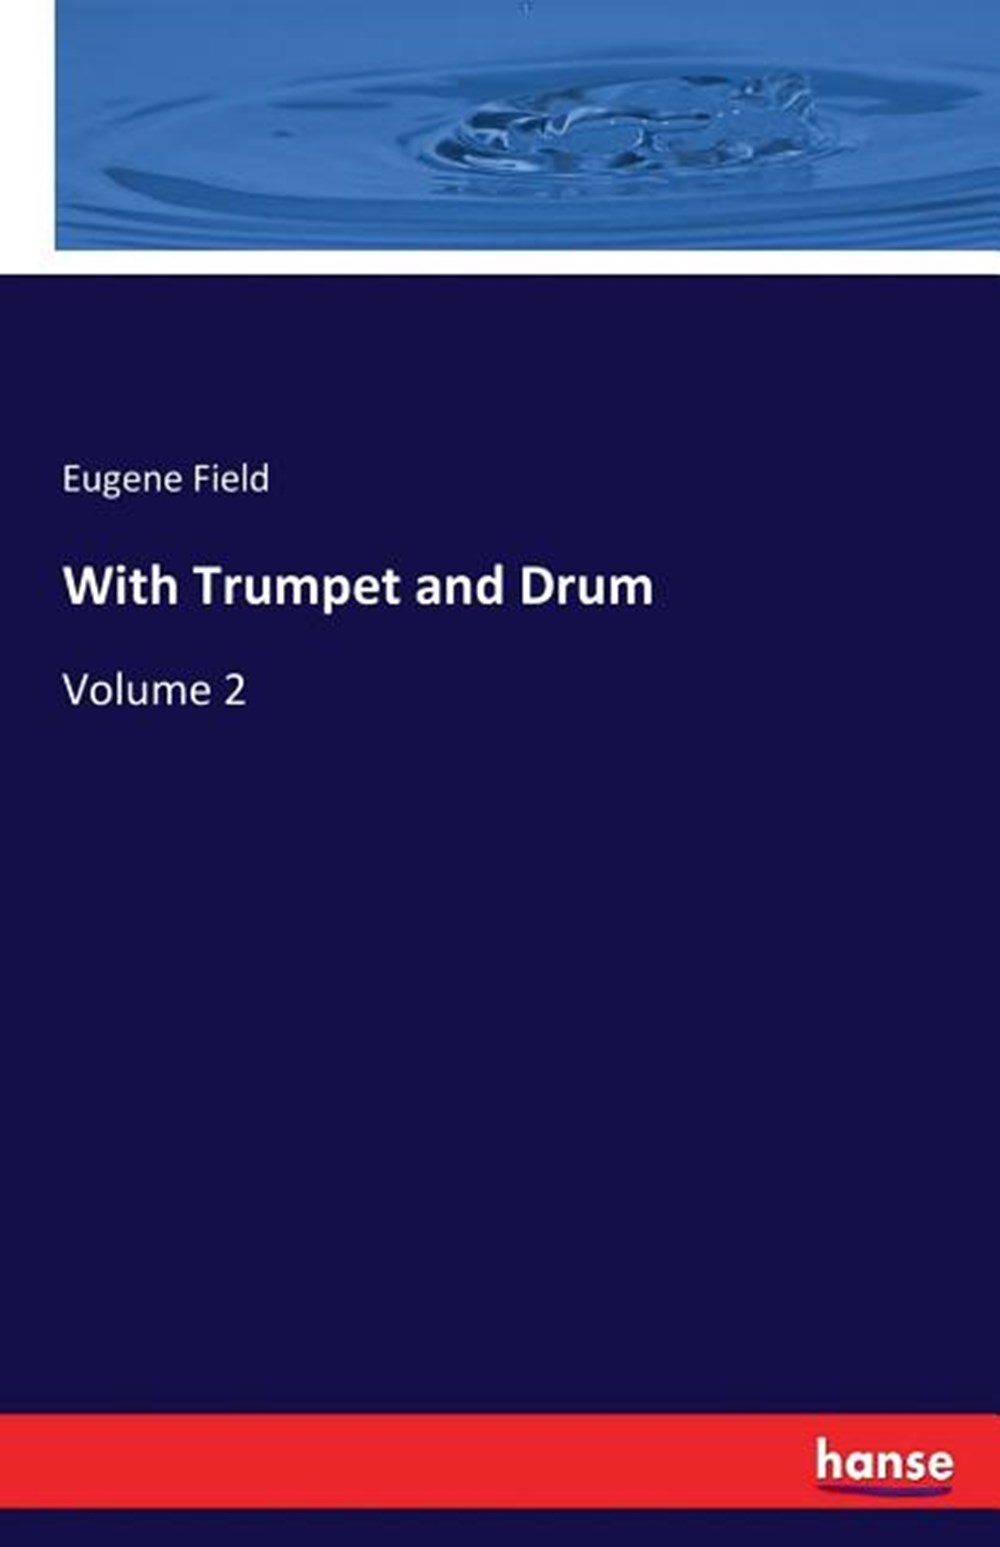 With Trumpet and Drum Volume 2